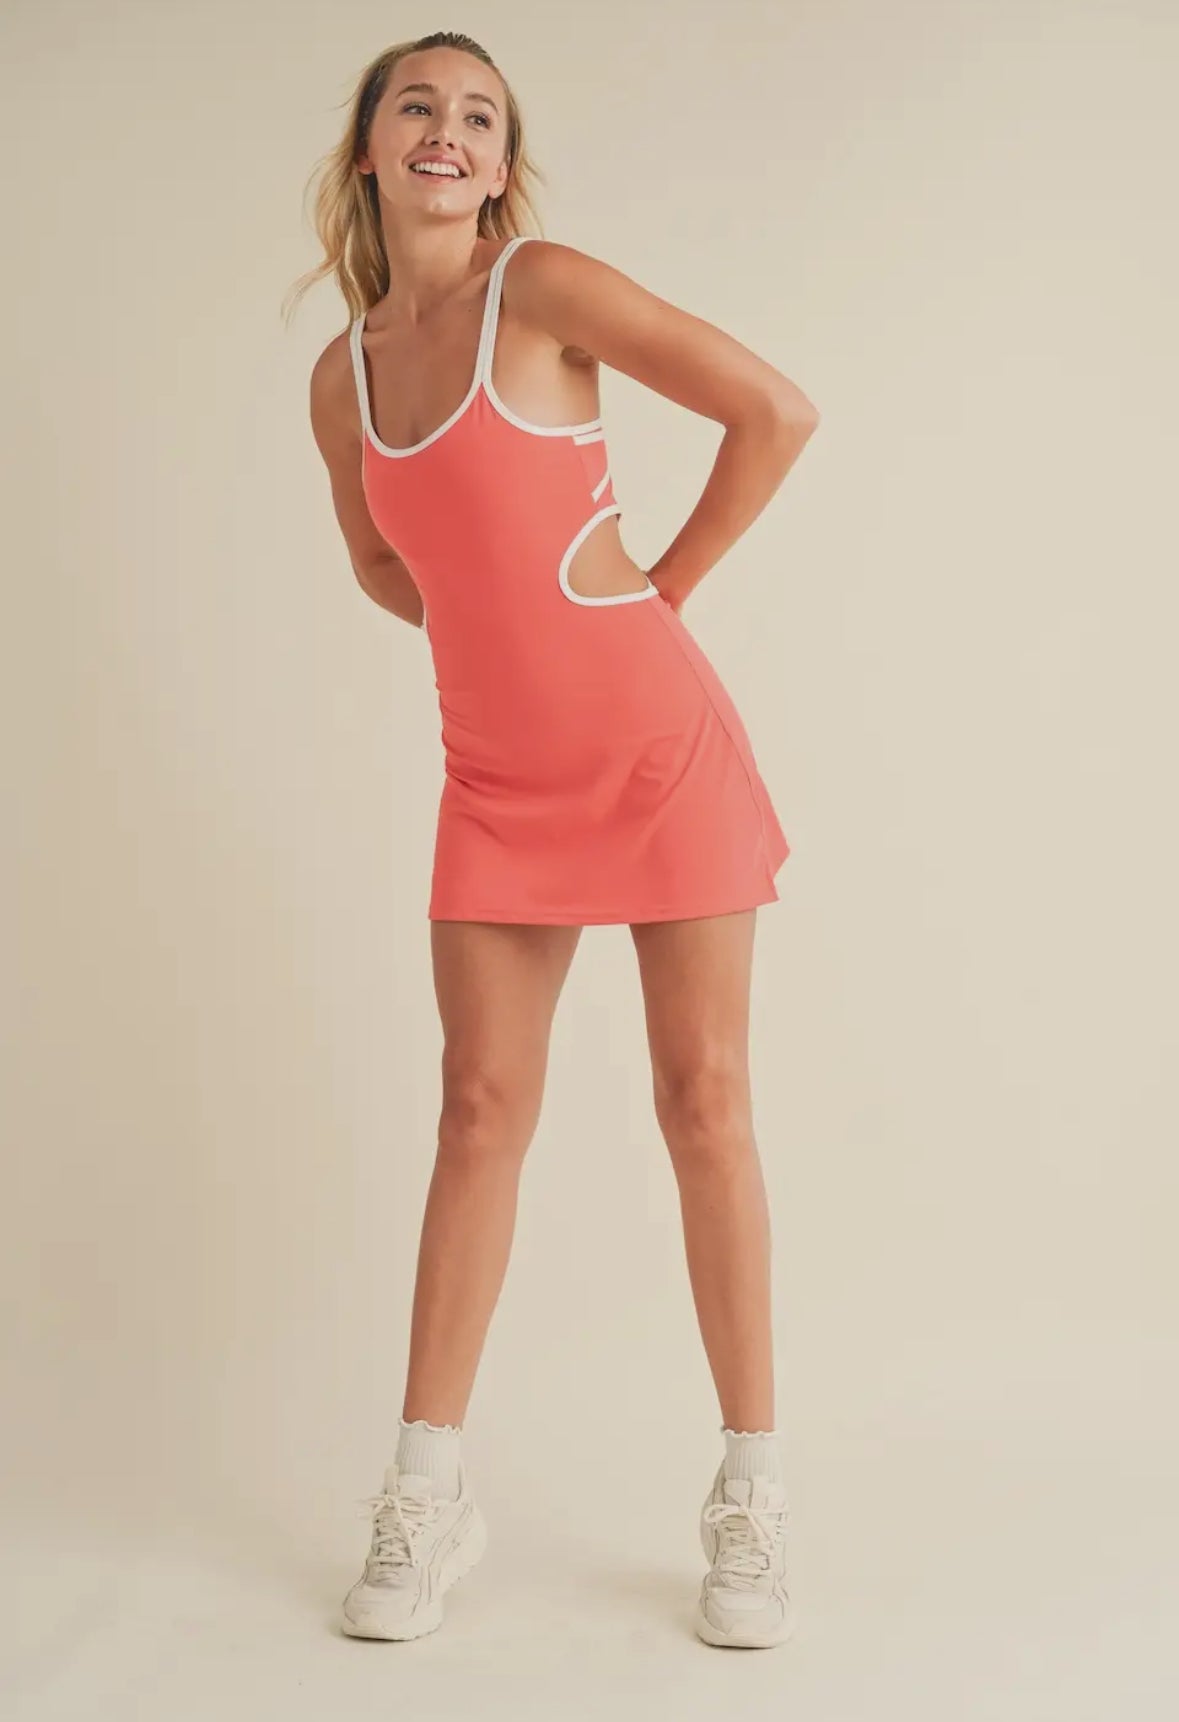 “On and off the court” athletic dress